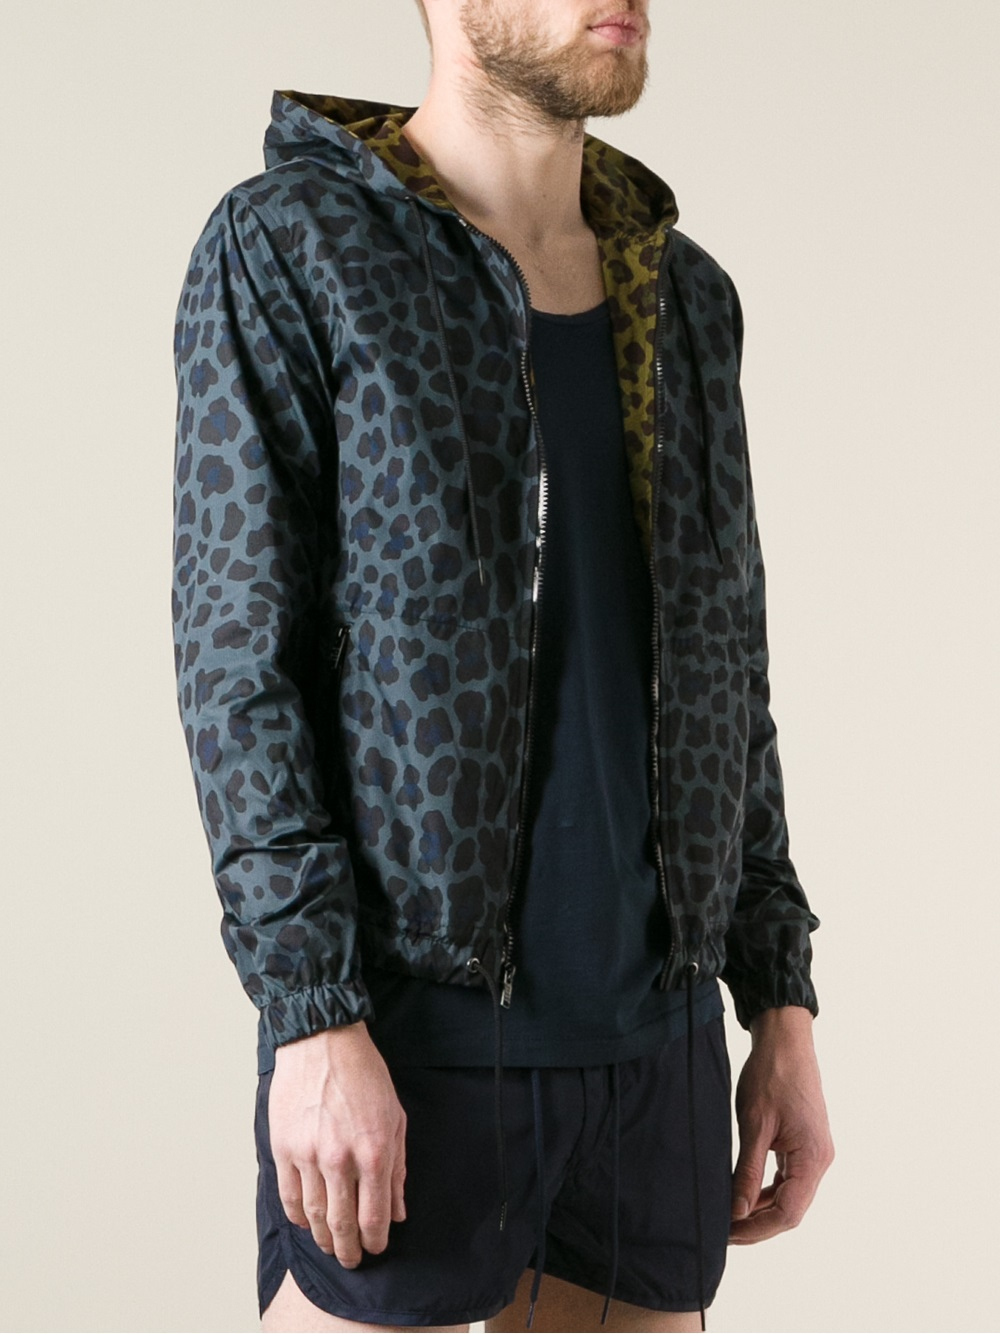 Lyst - Marc By Marc Jacobs Leopard Print Jacket in Gray for Men